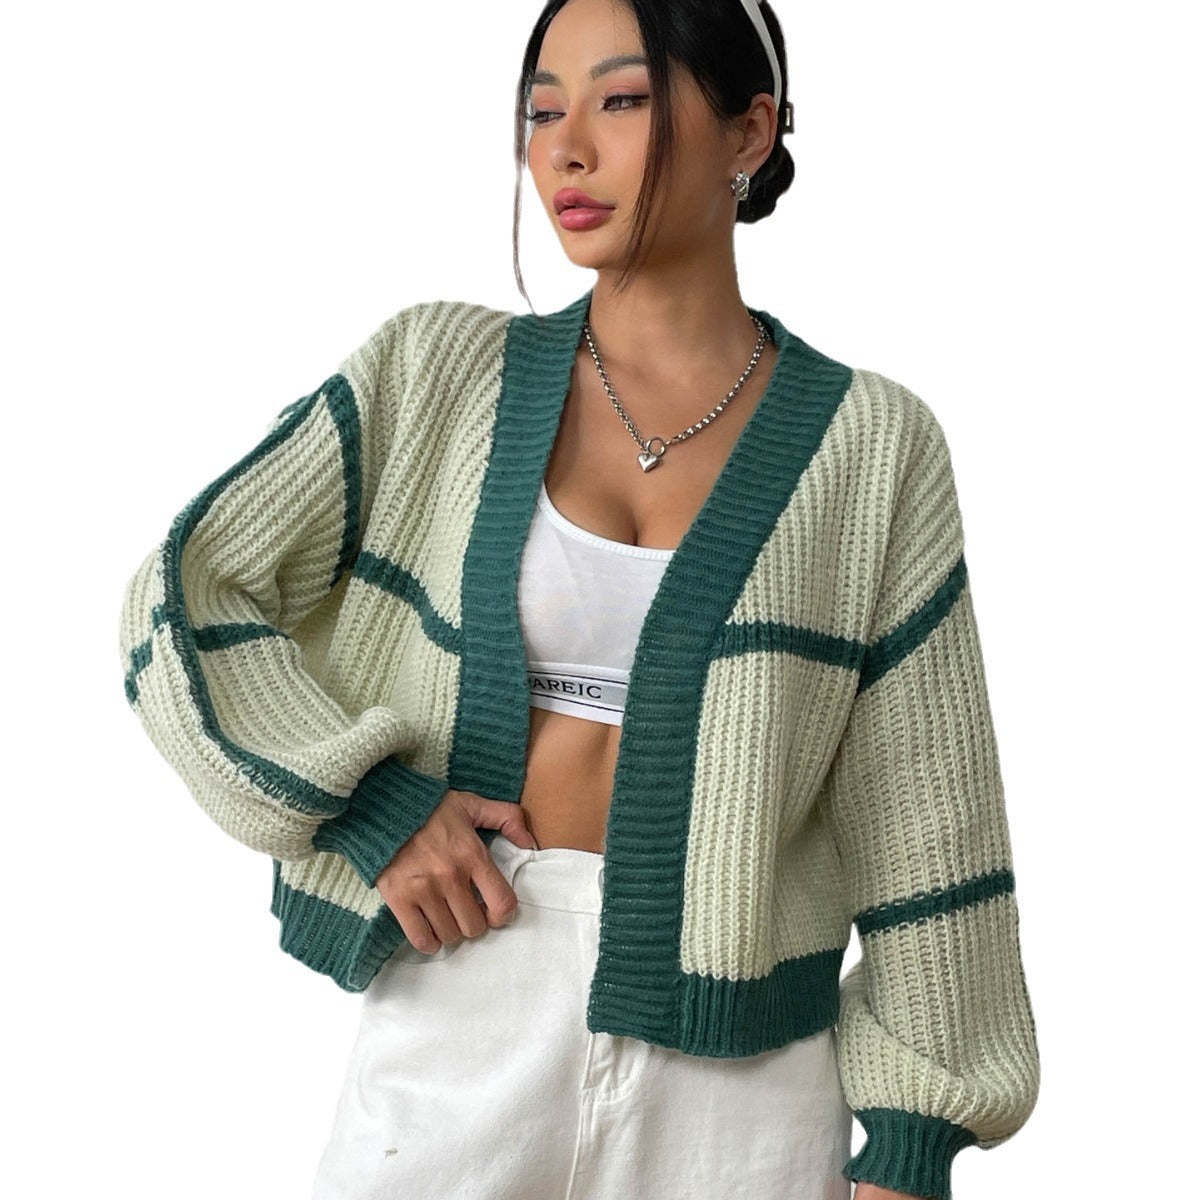 Urban Chic: Color Contrast Patchwork Sweater from Eternal Gleams